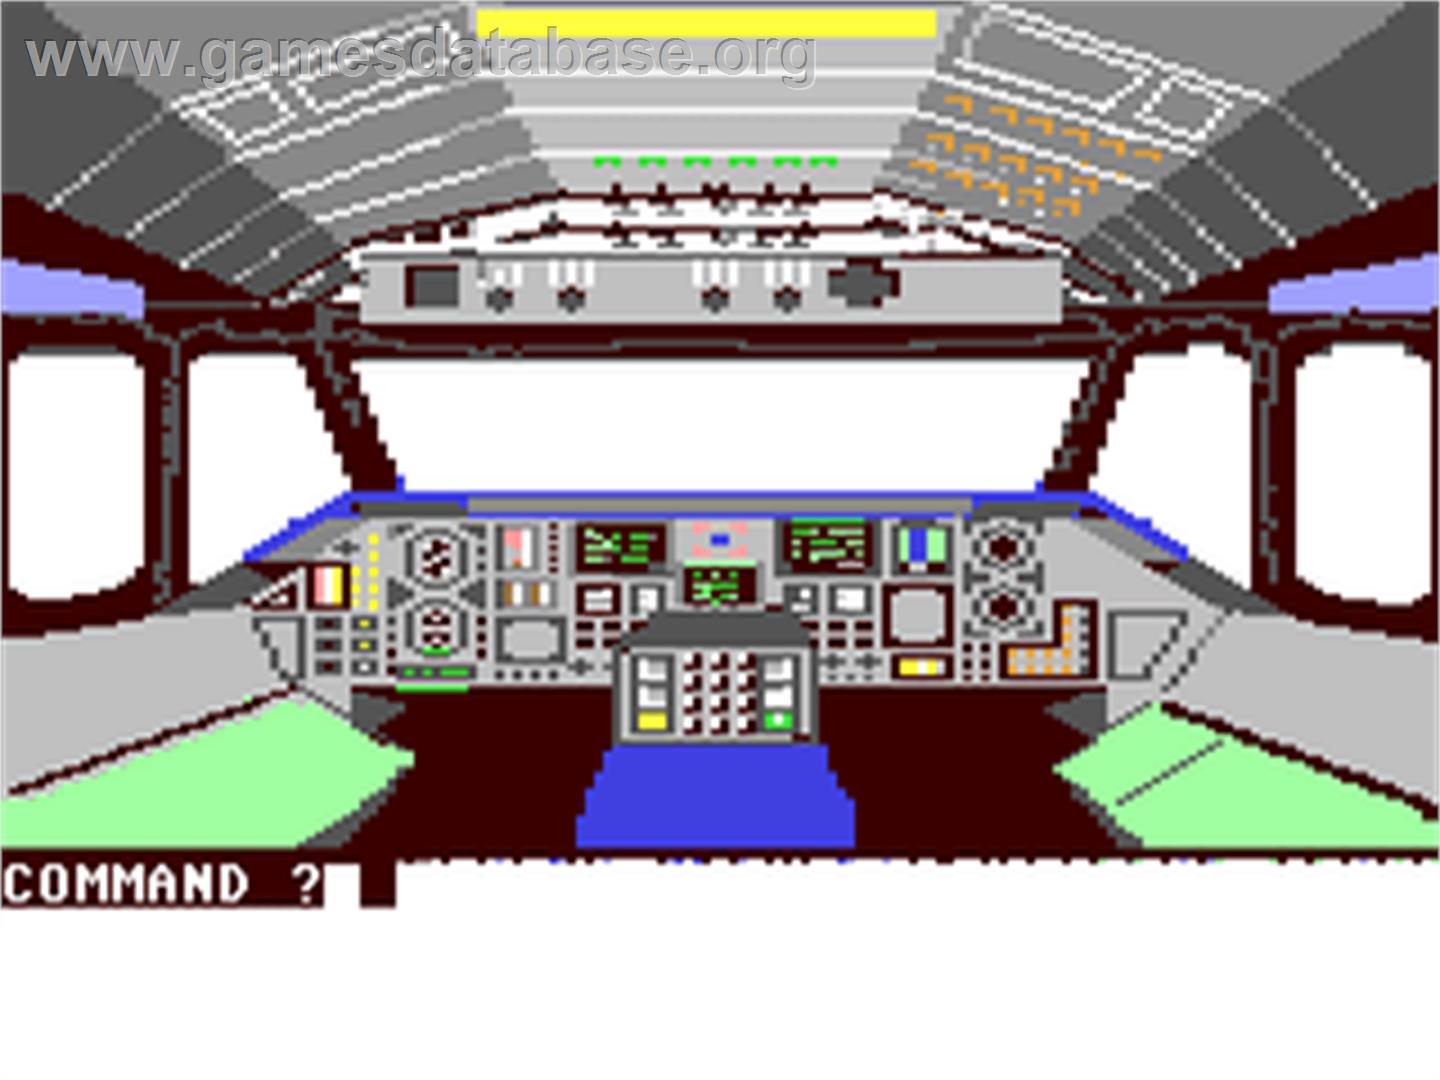 B-1 Nuclear Bomber - Commodore 64 - Artwork - In Game